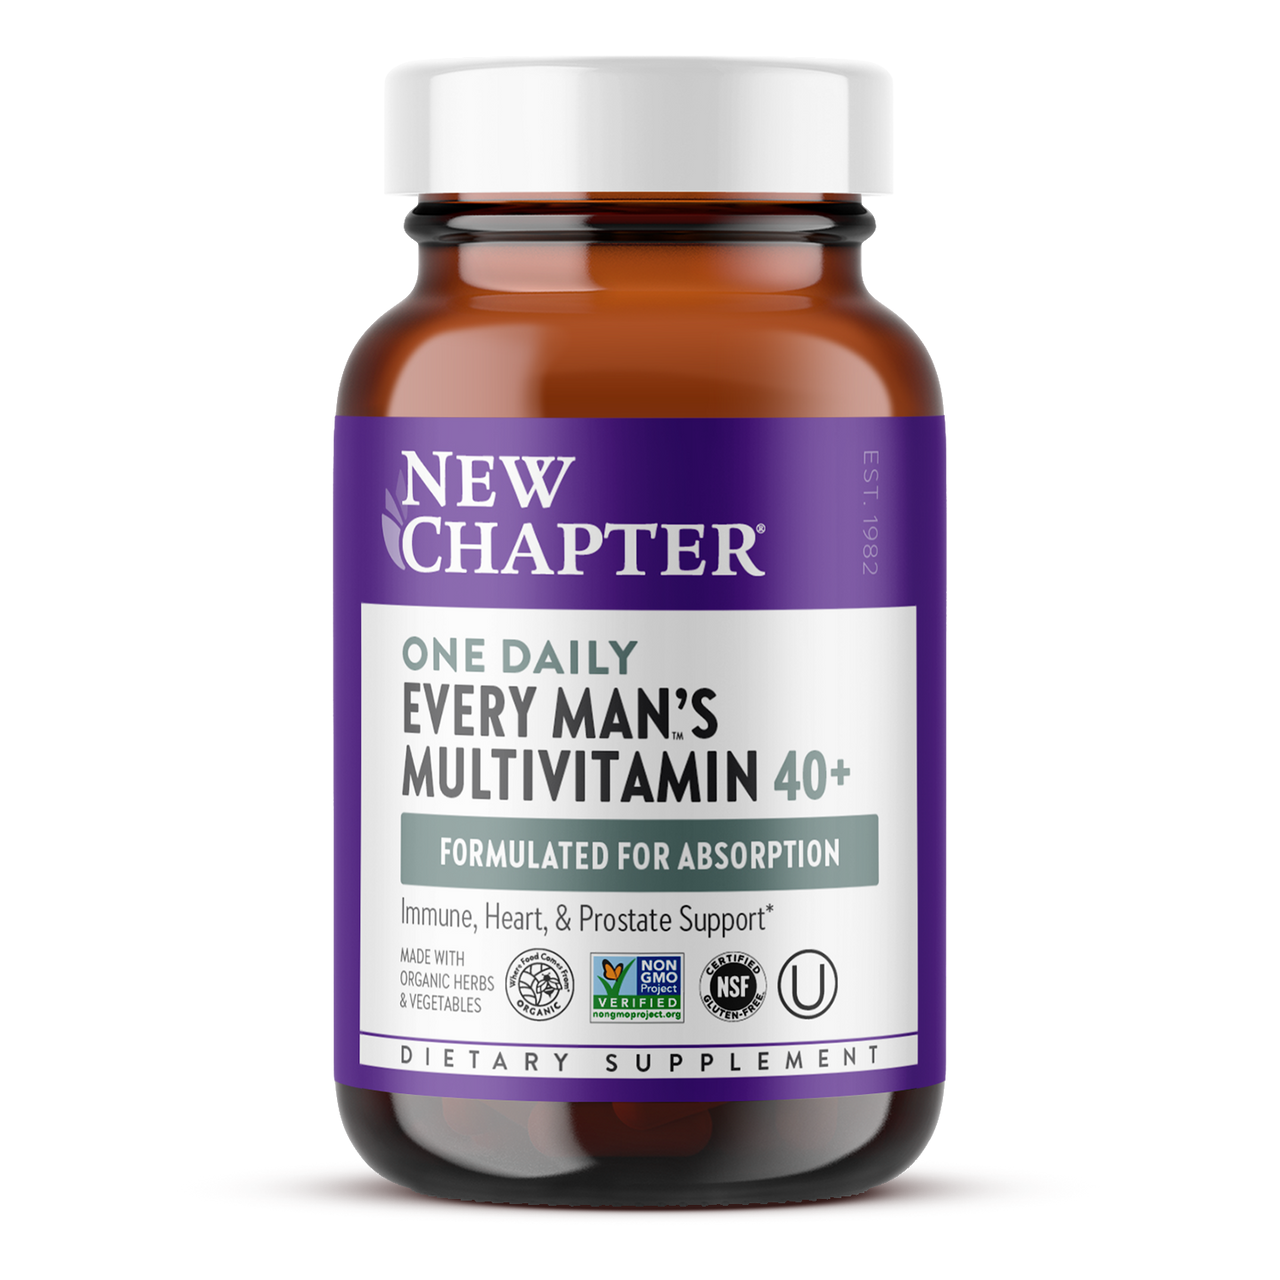 Every Man's One Daily 40+ Multivitamin - New Chapter